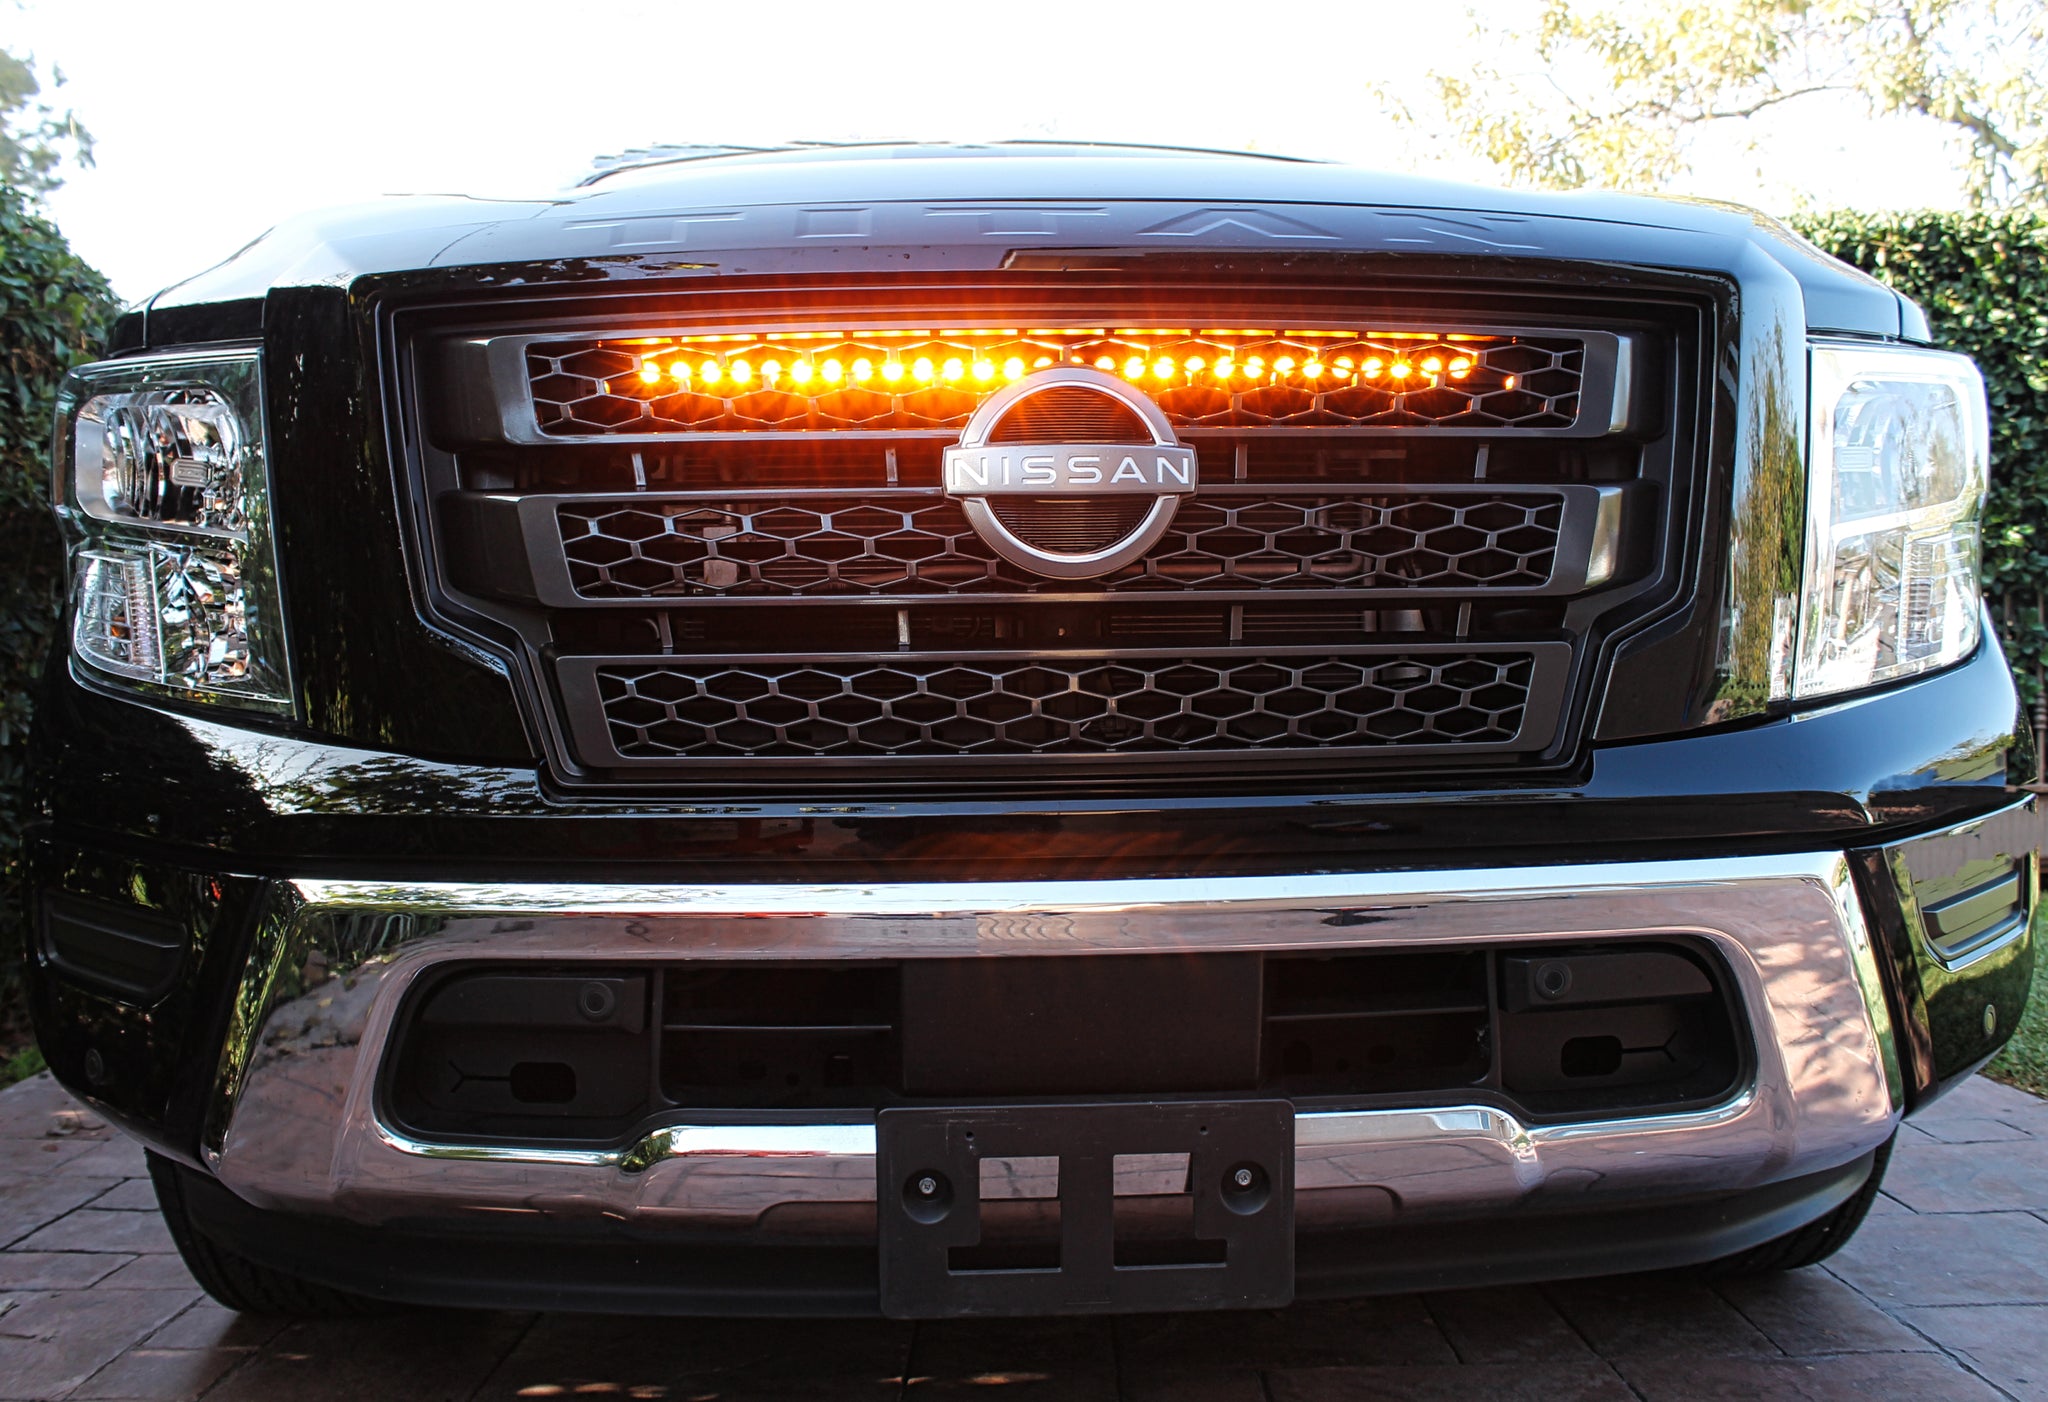 black nissan titan with one led light bar behind the grille in amber color for off roading